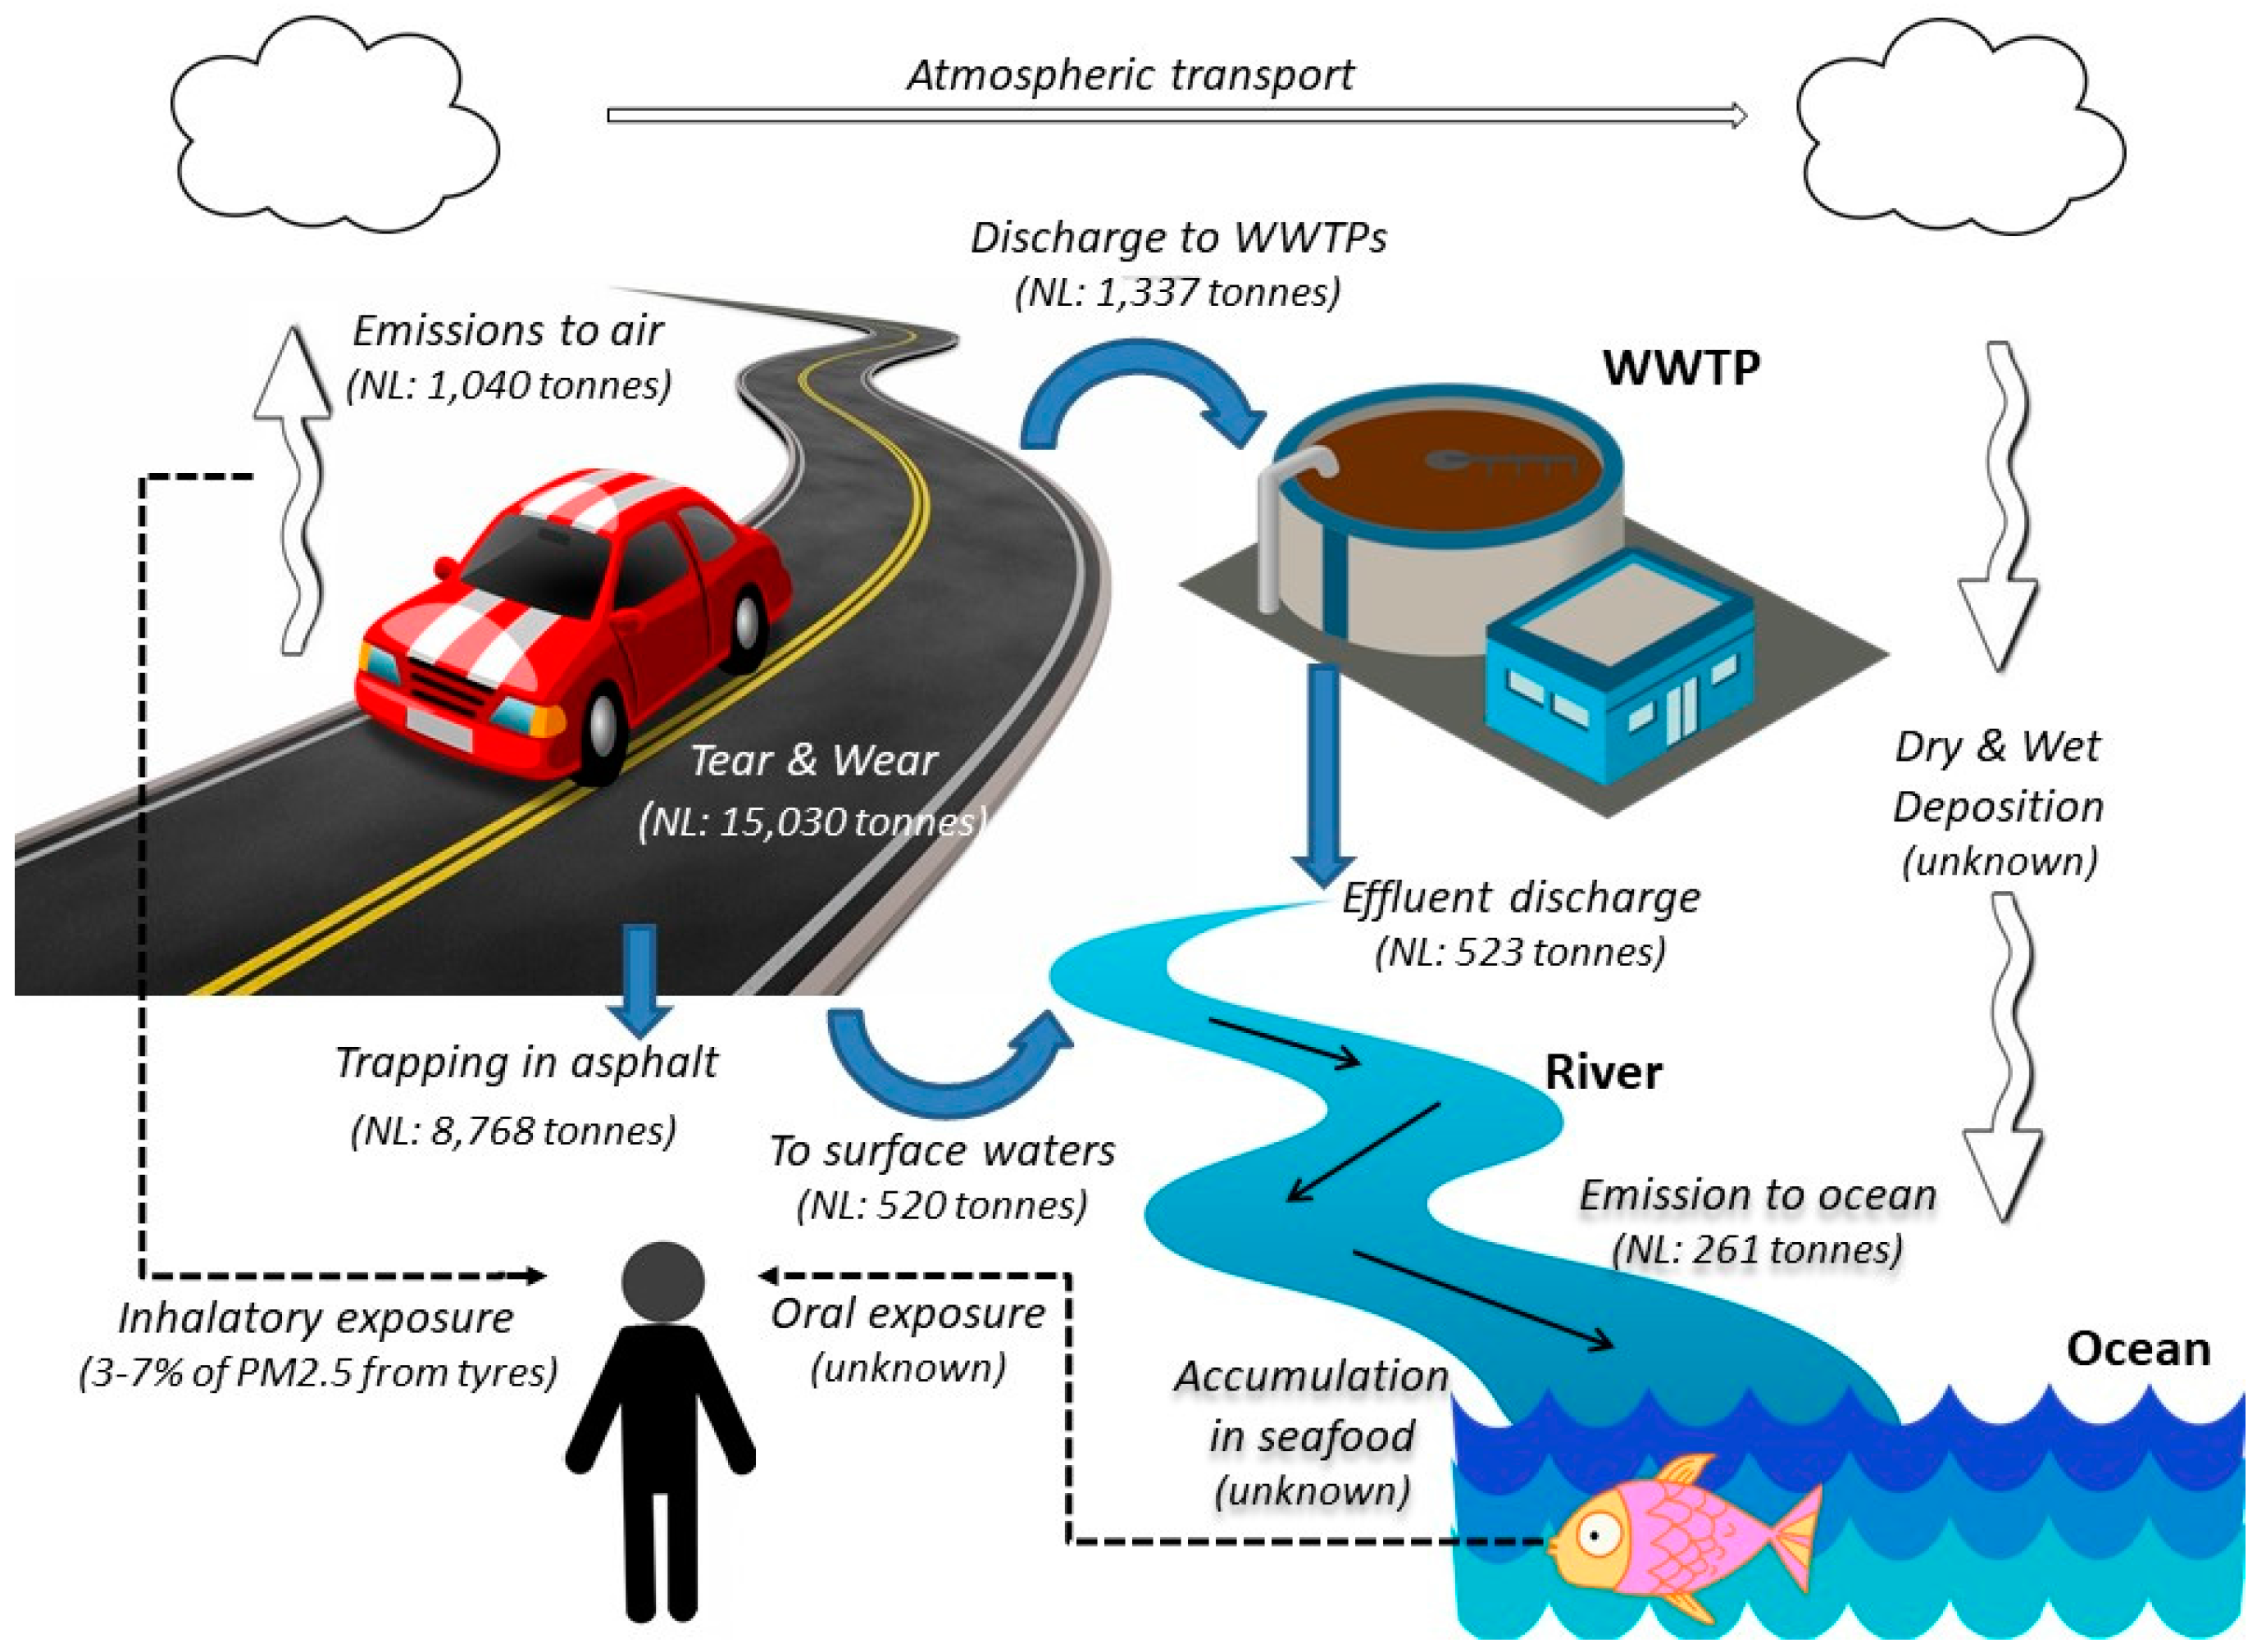 Atmospheric transport is a major pathway of microplastics to remote regions